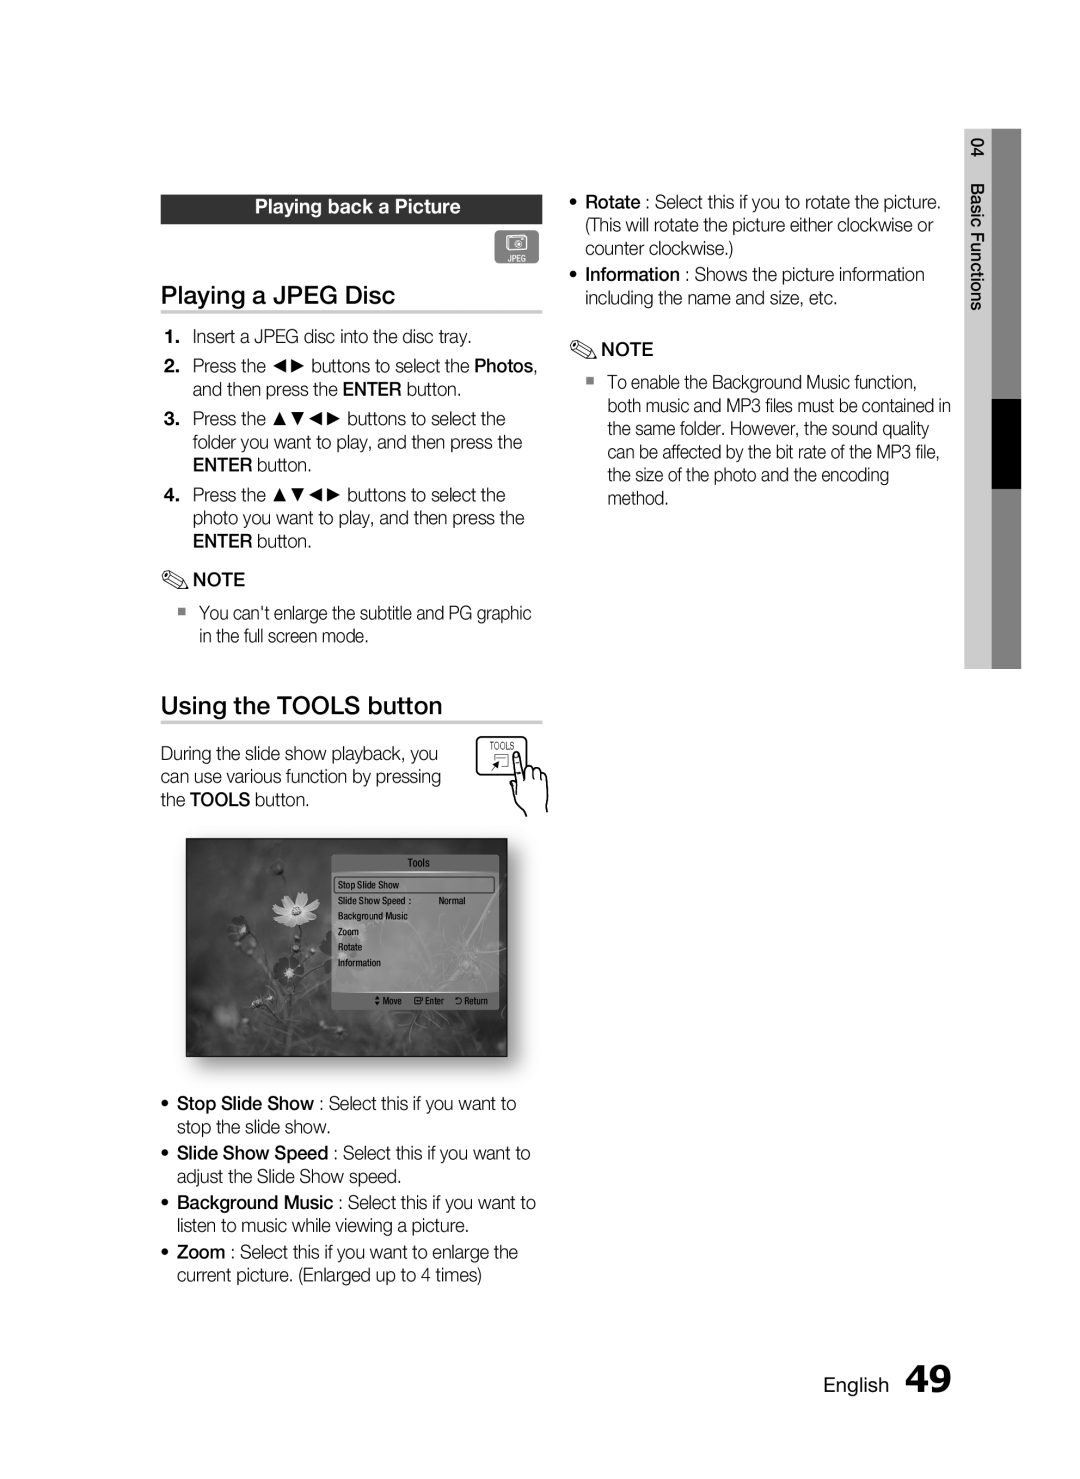 Samsung HT-C5200 user manual Playing a JPEG Disc, Using the TOOLS button, Playing back a Picture, English 